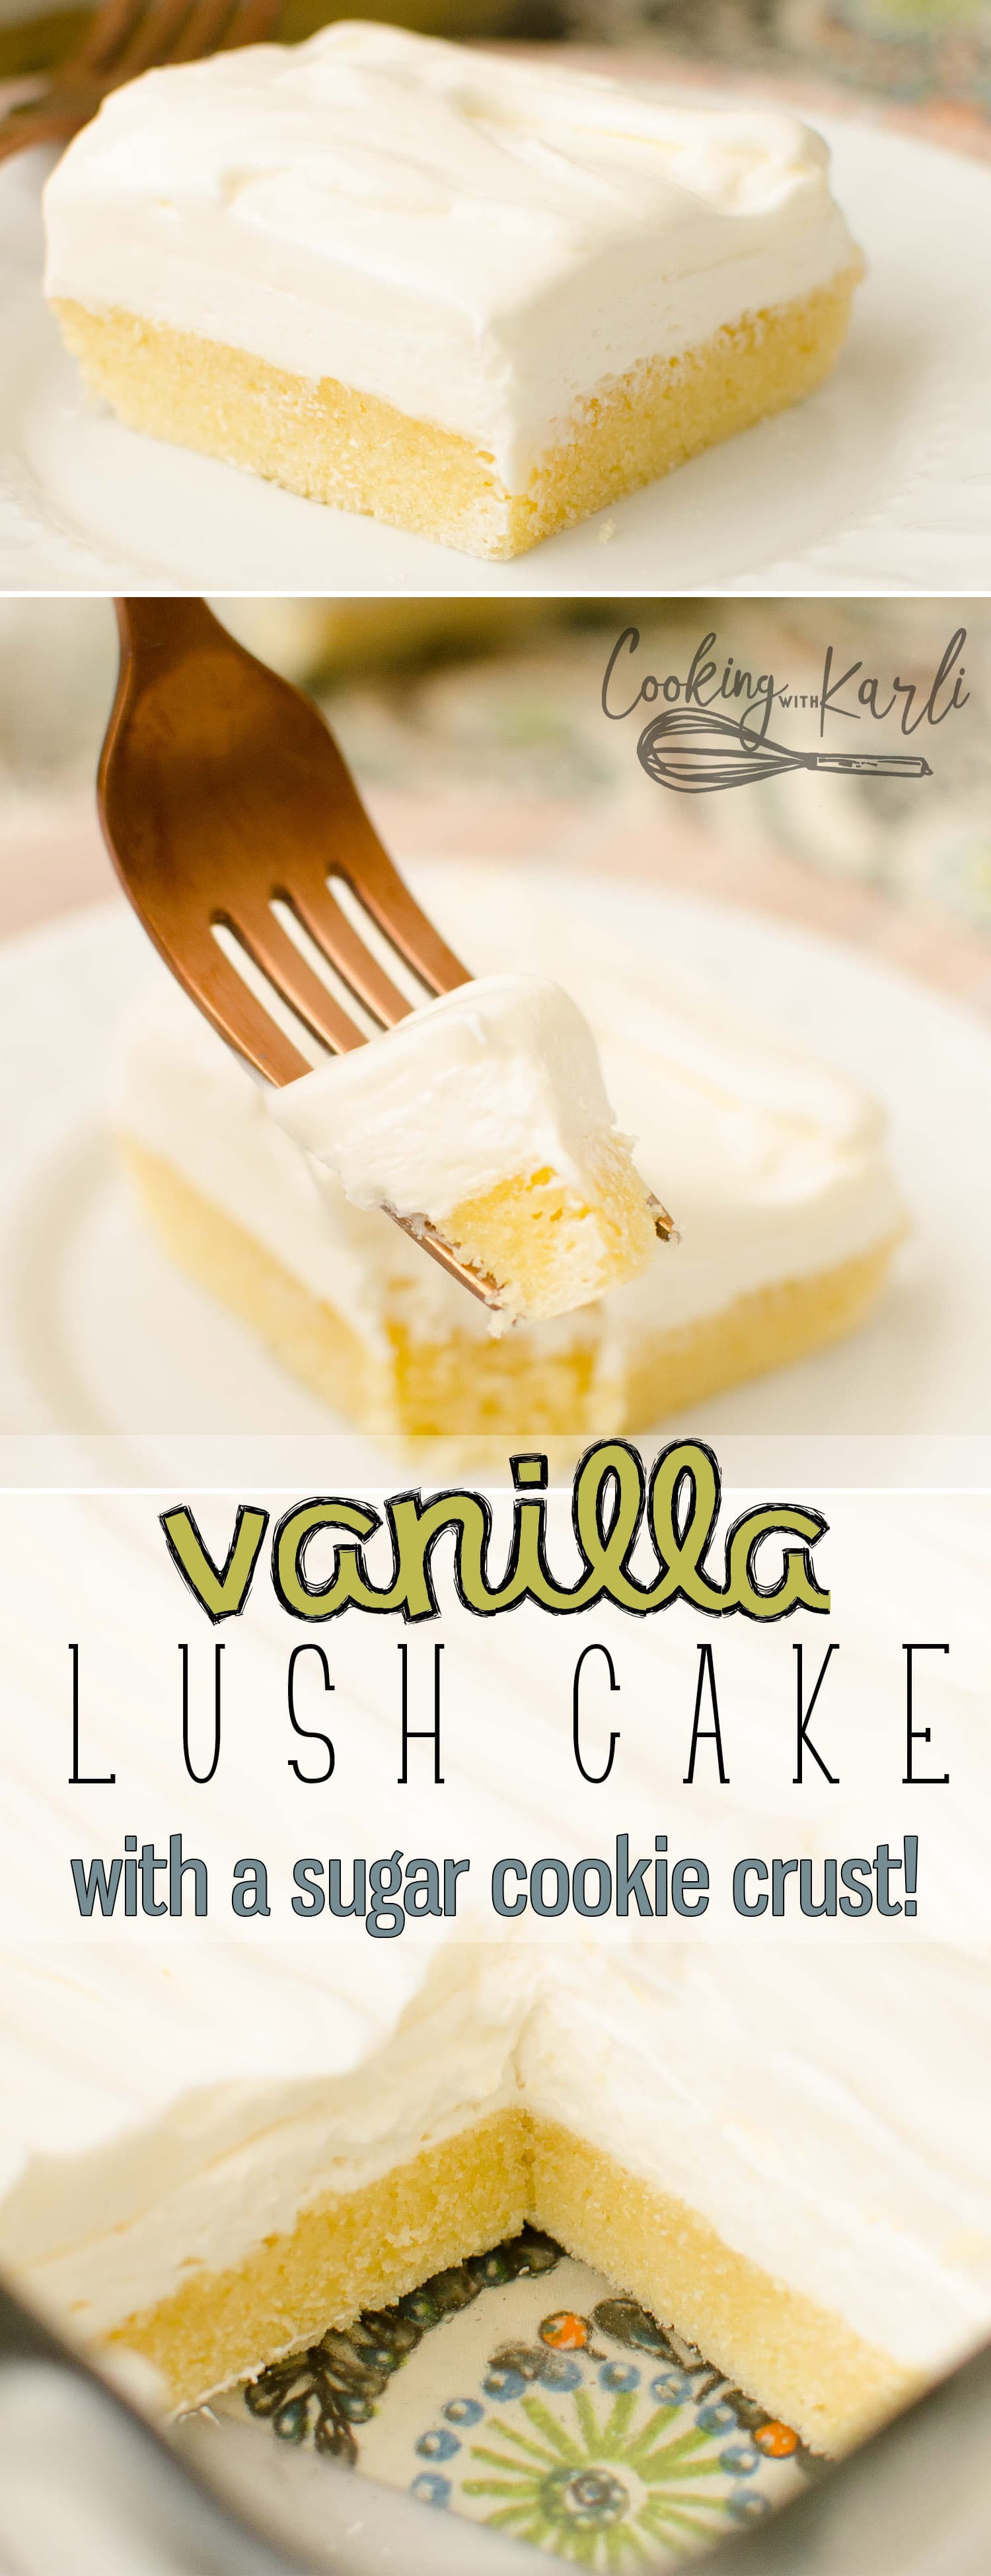 Vanilla Lush Cake is a simple, layered Cool Whip dessert with a thick & chewy sugar cookie crust. The sugar cookie crust is topped with a cream cheese layer and a vanilla Cool Whip layer. This dessert is perfect for potlucks and get togethers! |Cooking with Karli| #lushcake #lush #cake #dessert #potluck #coolwhip #recipe #easy 